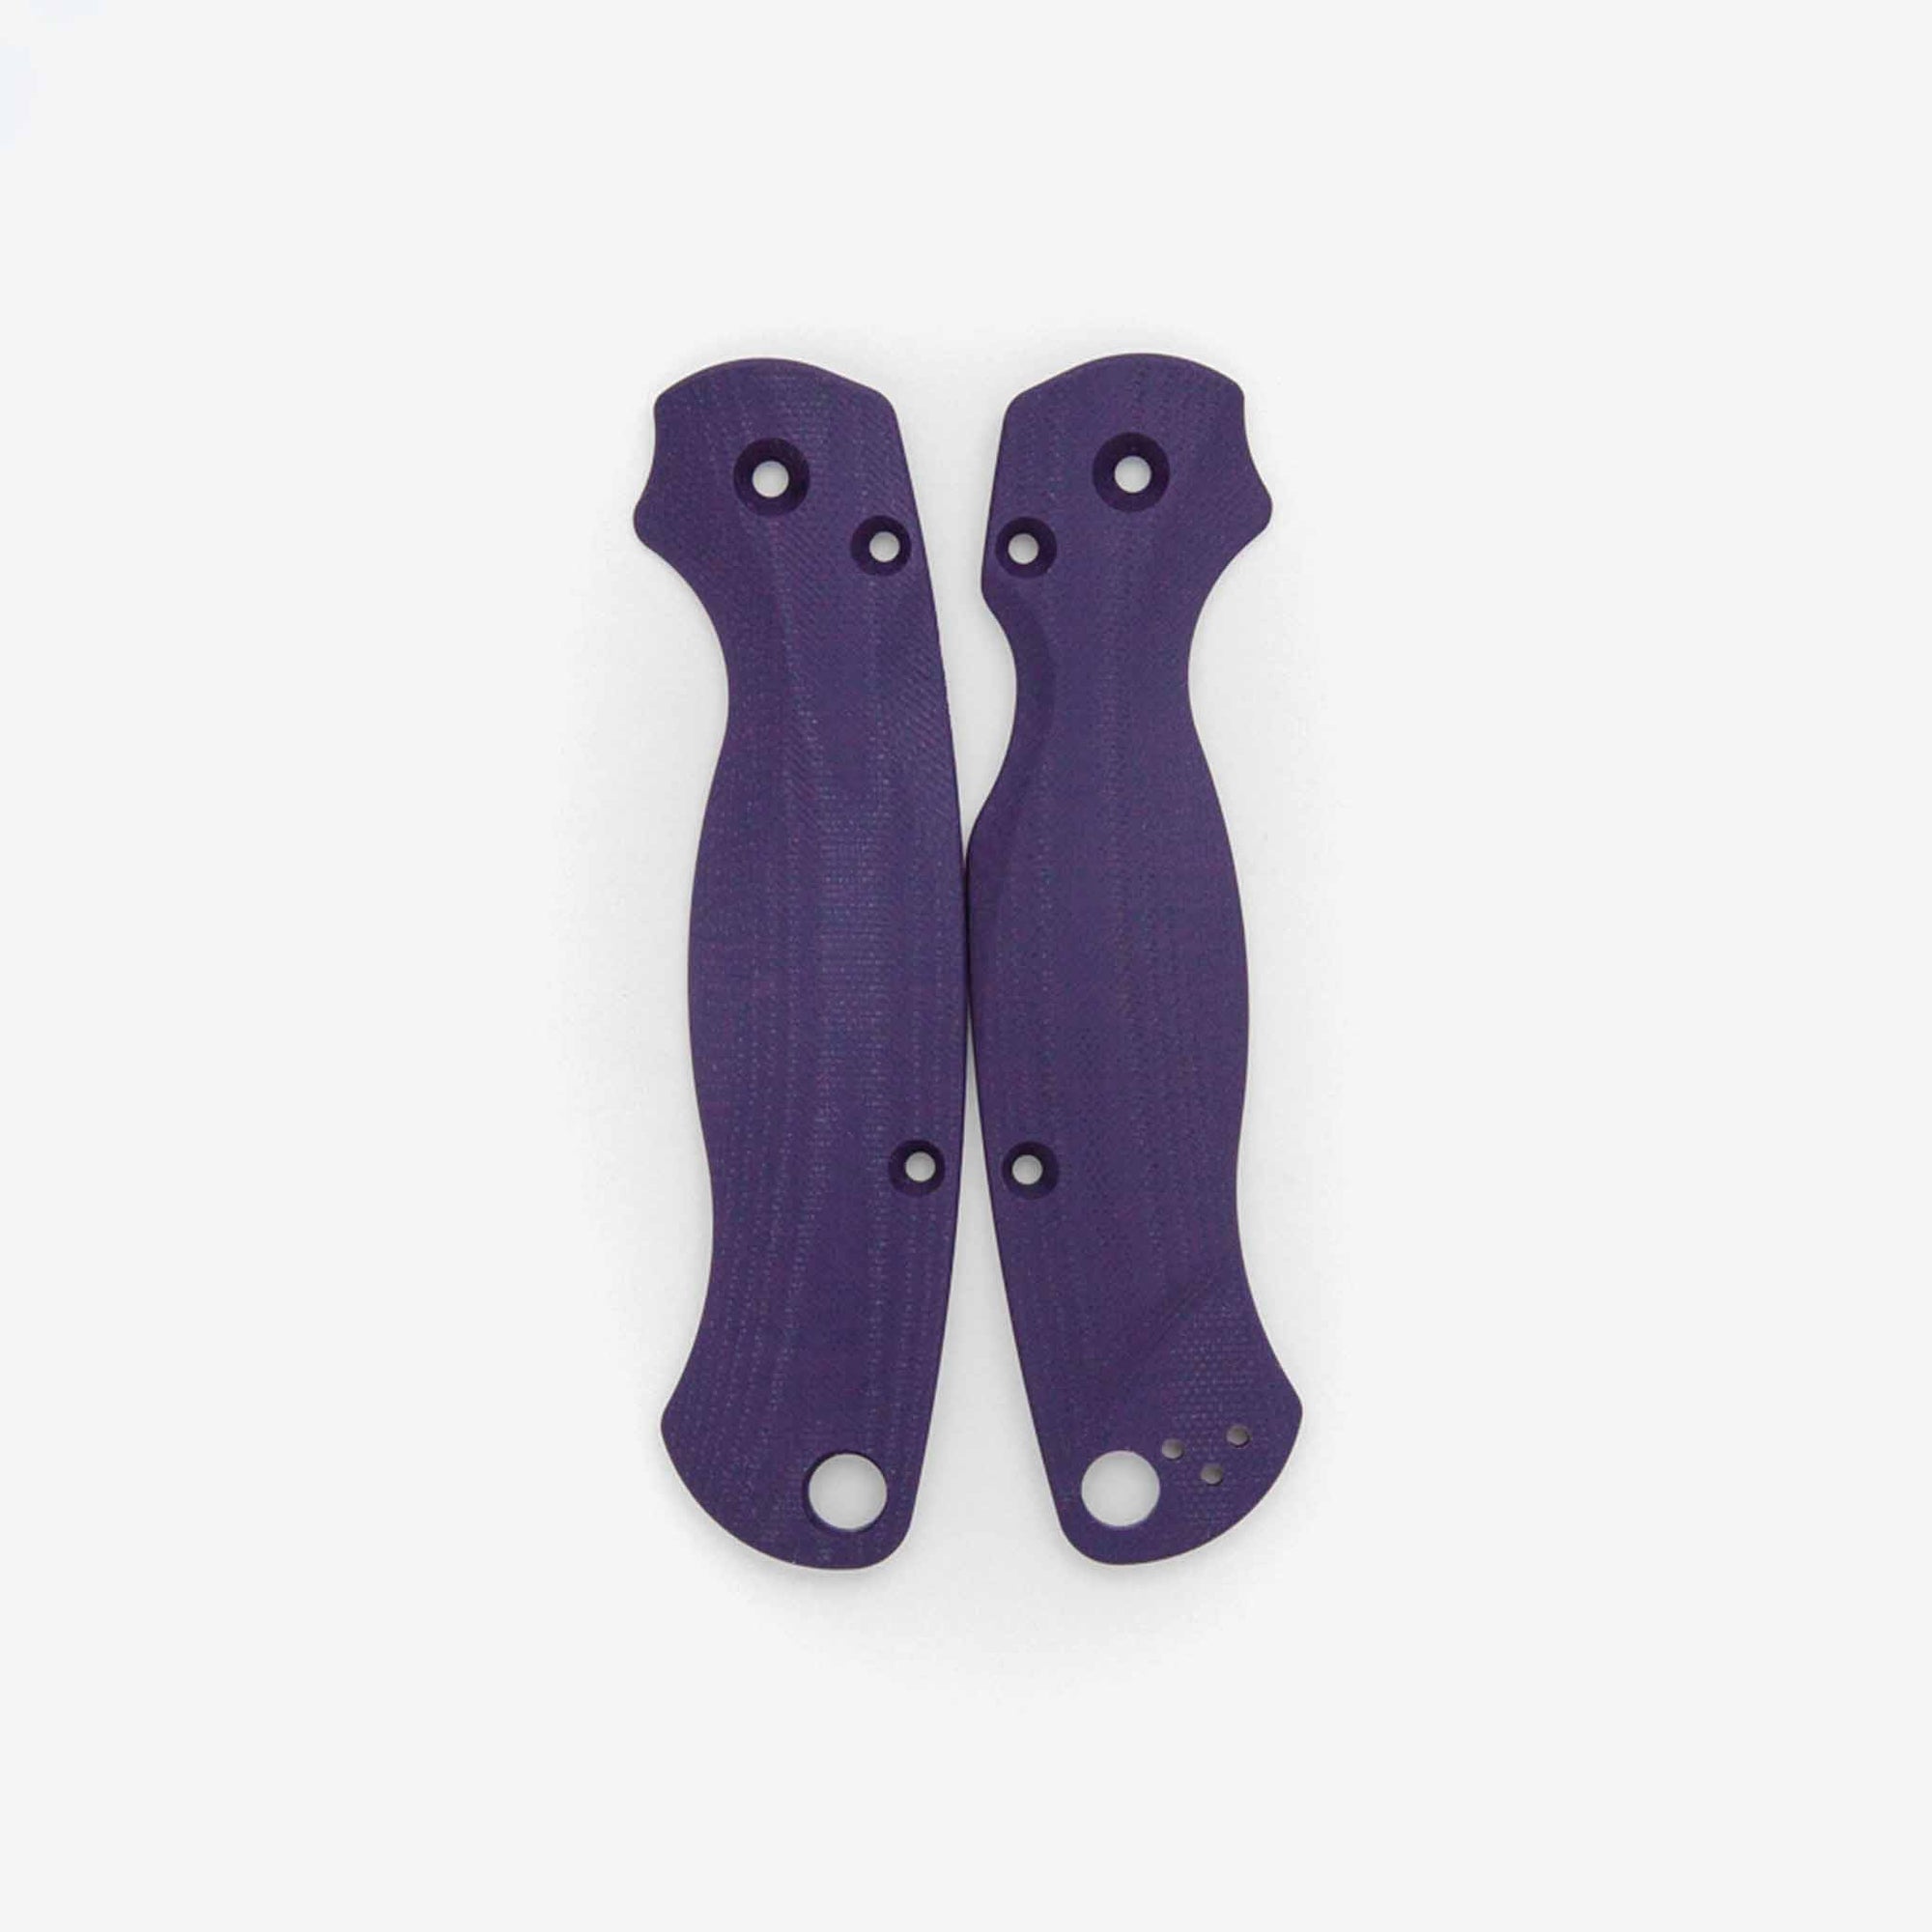 G-10 Lotus scales for the Spyderco Paramilitary 2 knife in the color purple